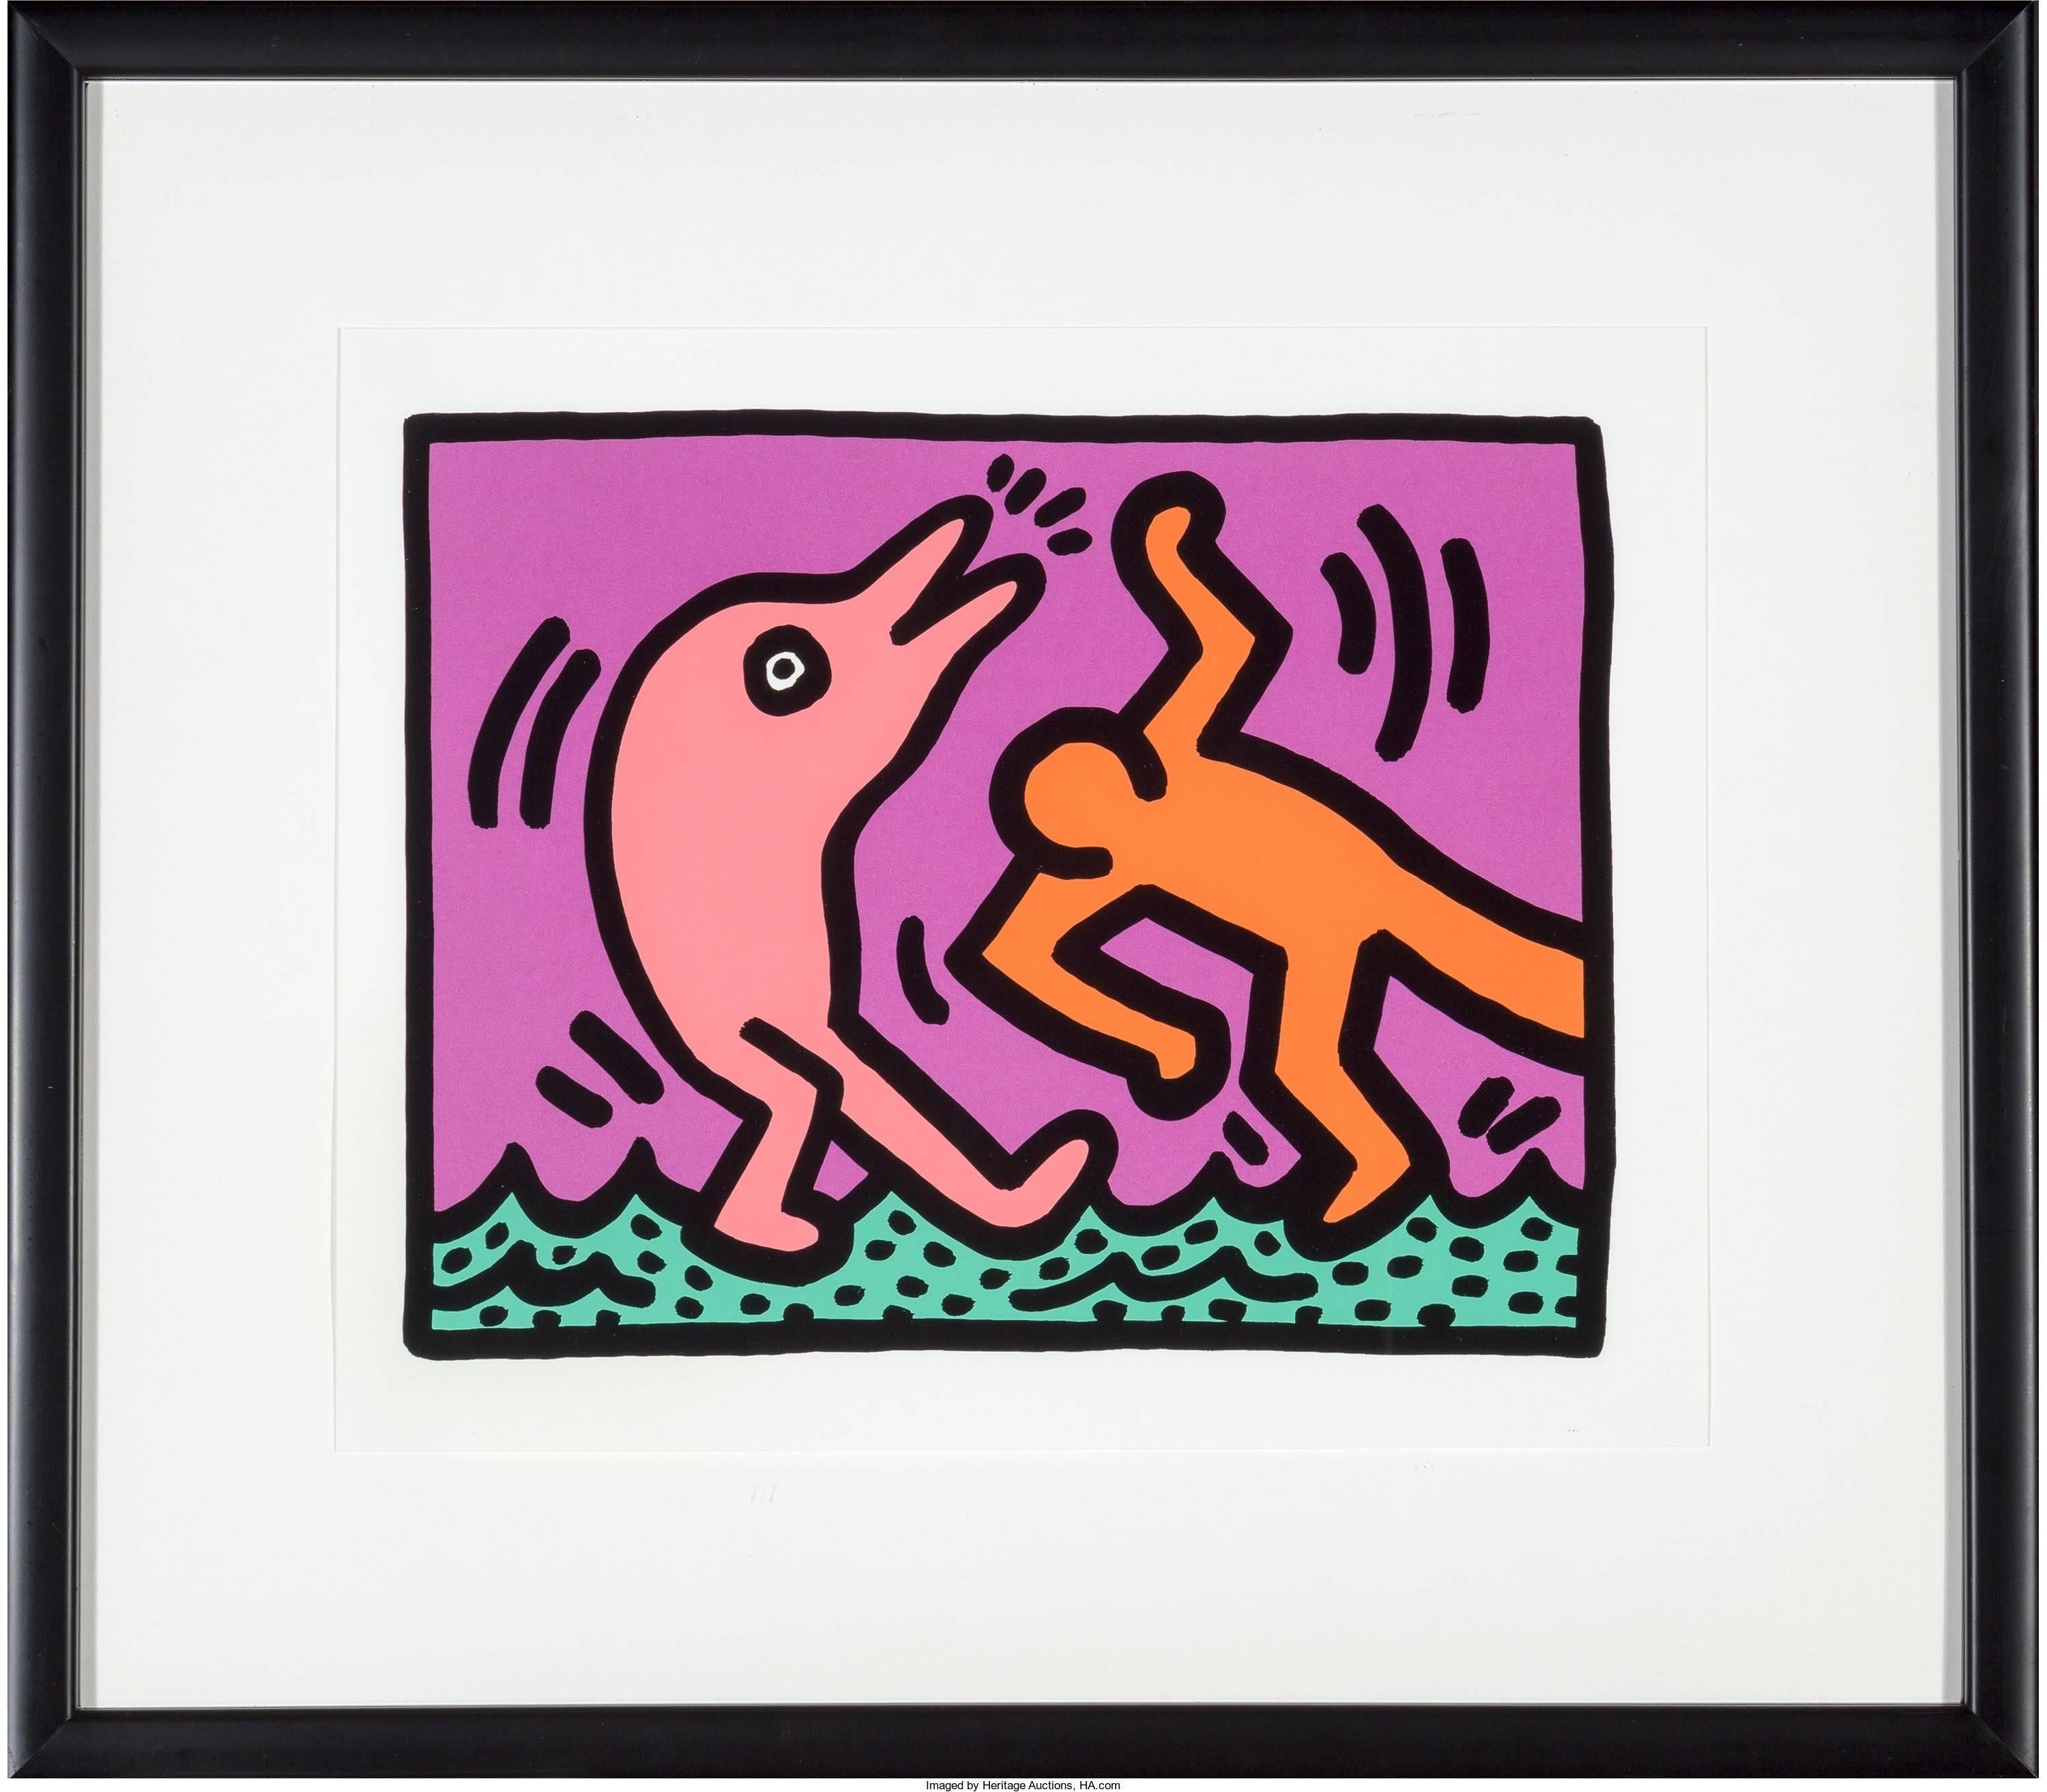 Pop Shop V (4) - Print by Keith Haring